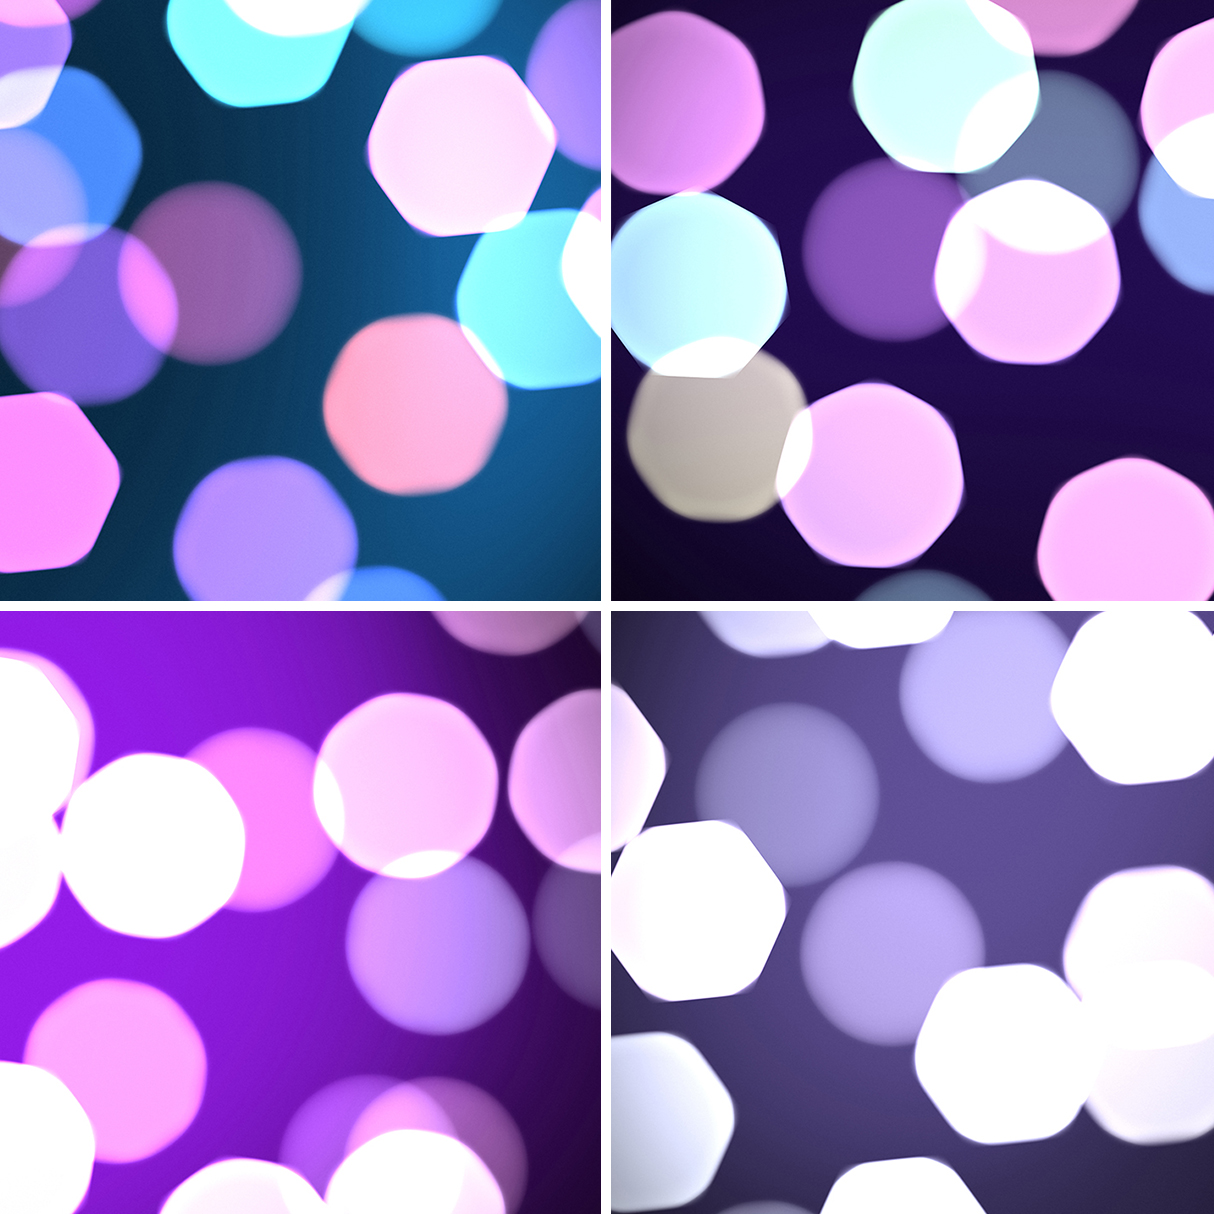 50 Bokeh Pro Backgrounds Samples Preview – Part 7